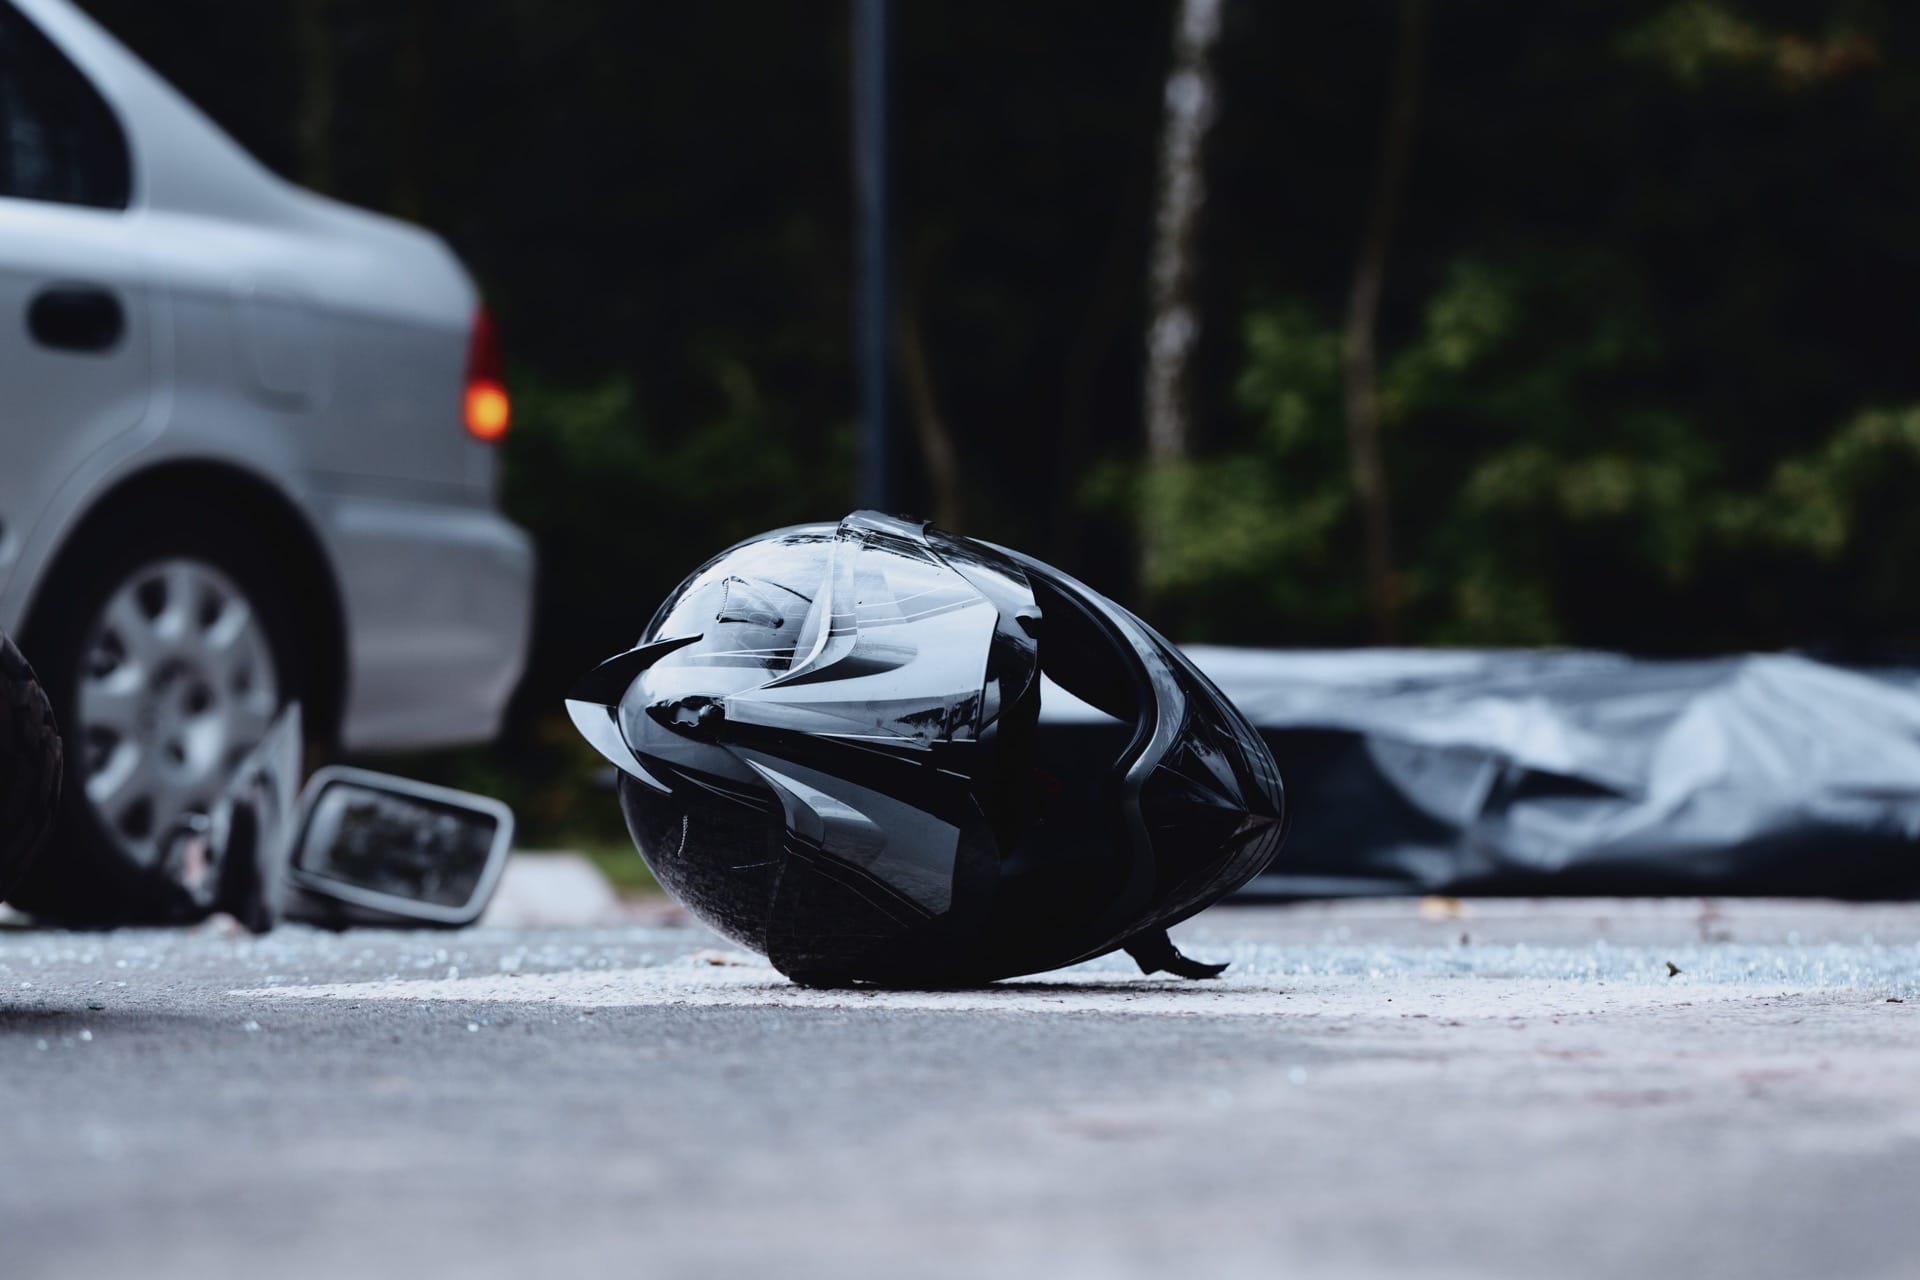 Helmet on the ground after a motorcycle accident